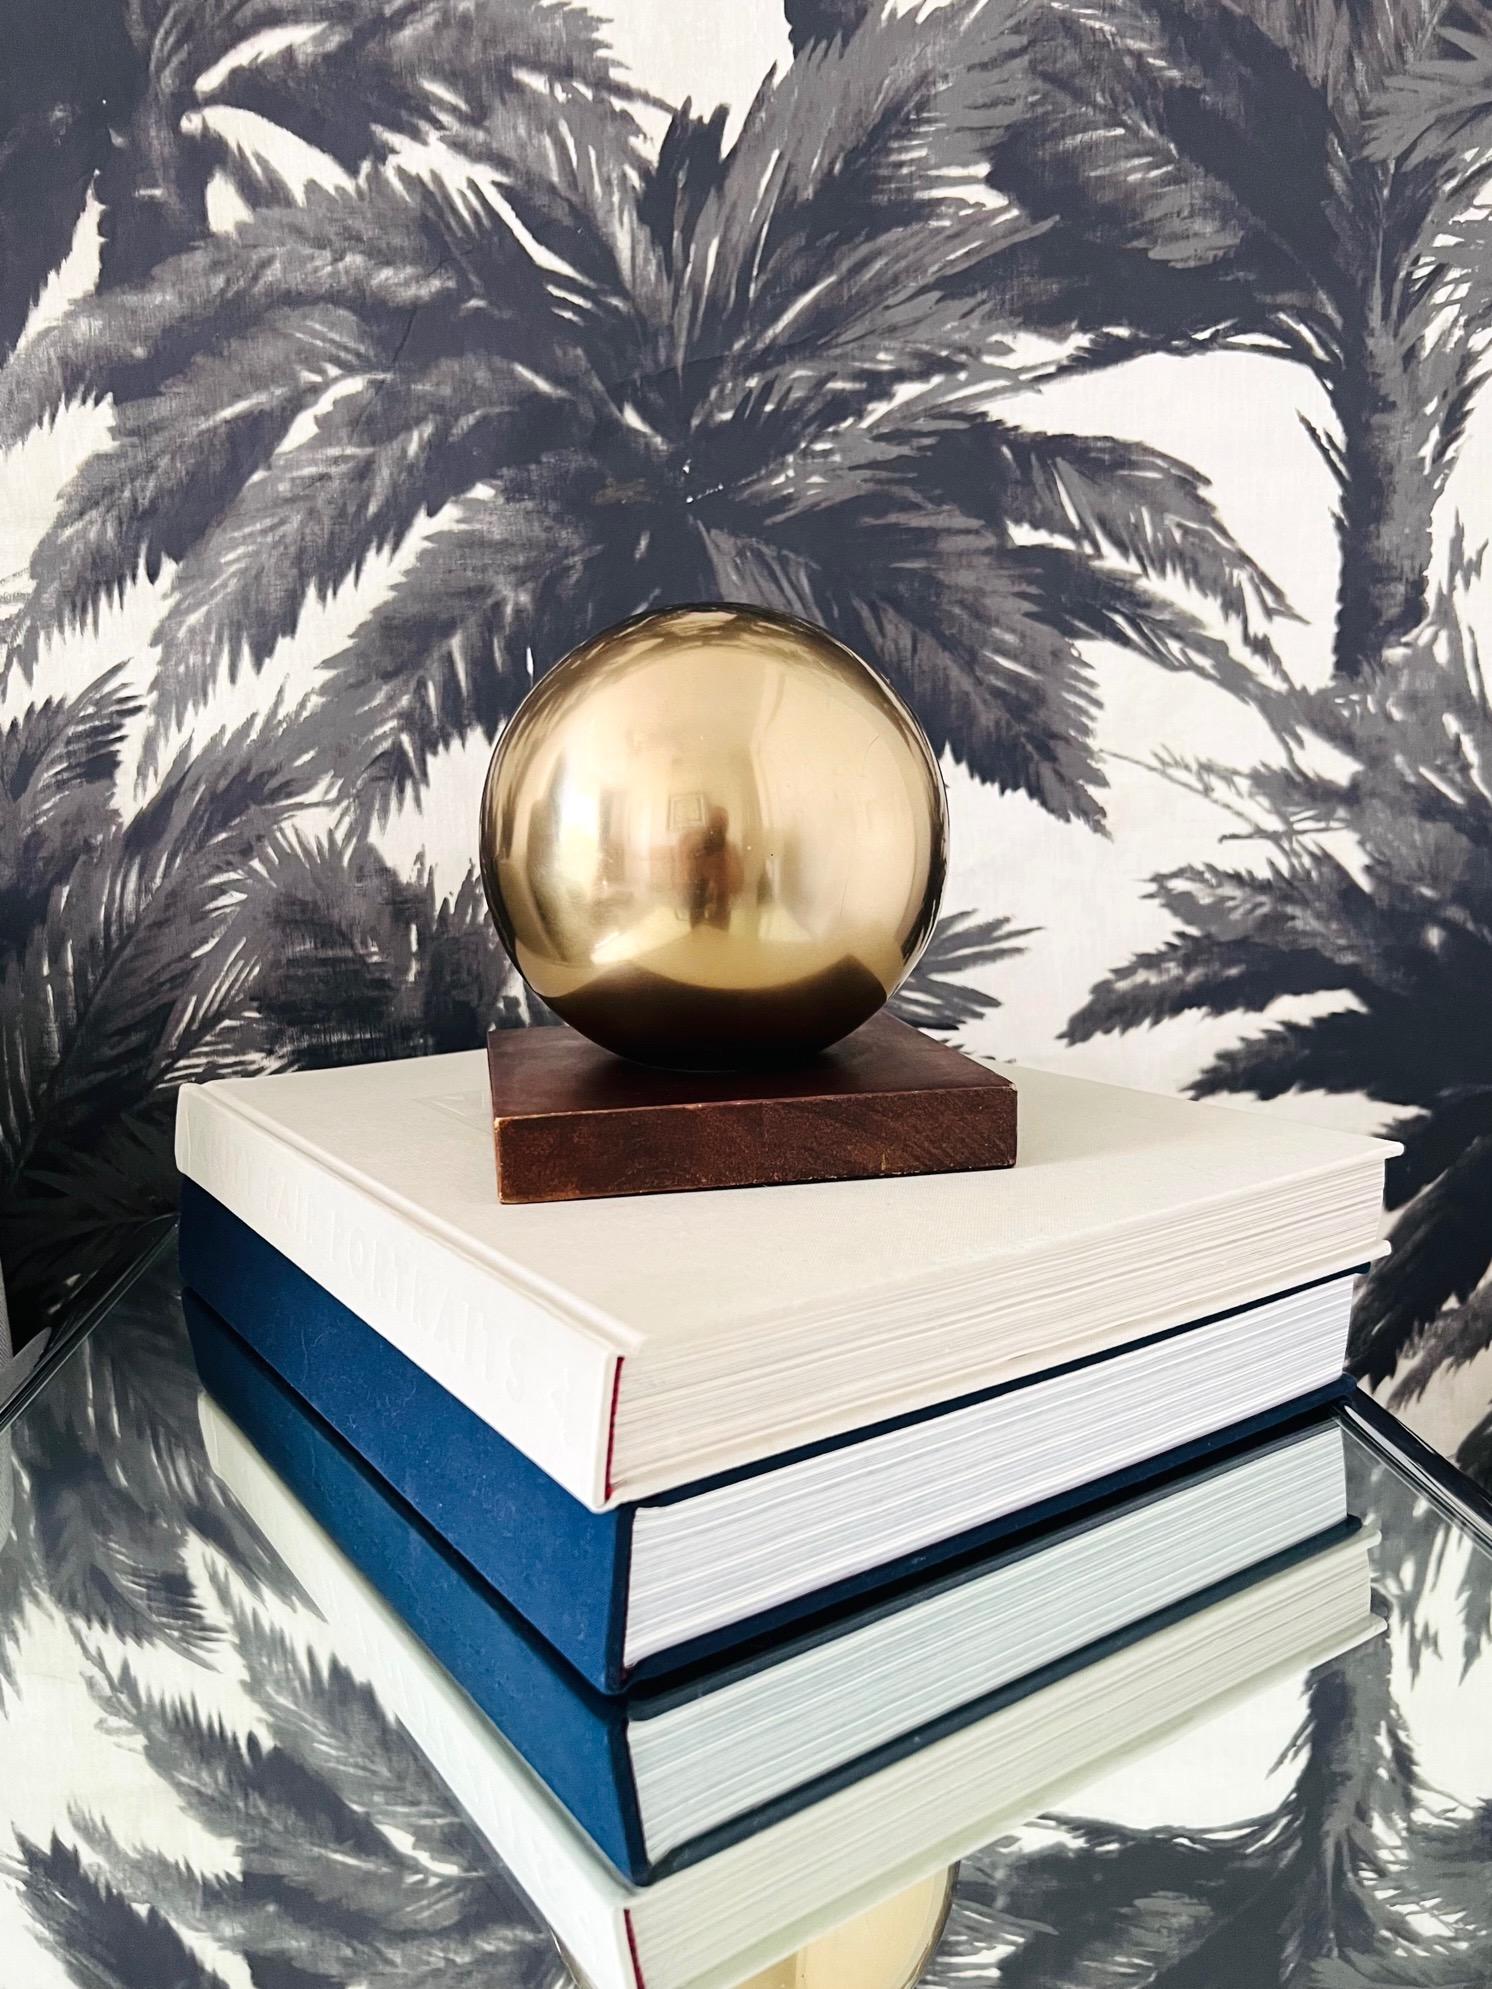 Late 20th Century Mid-Century Modern Architectural Brass Globe Bookend & Decorative Object, 1970s For Sale